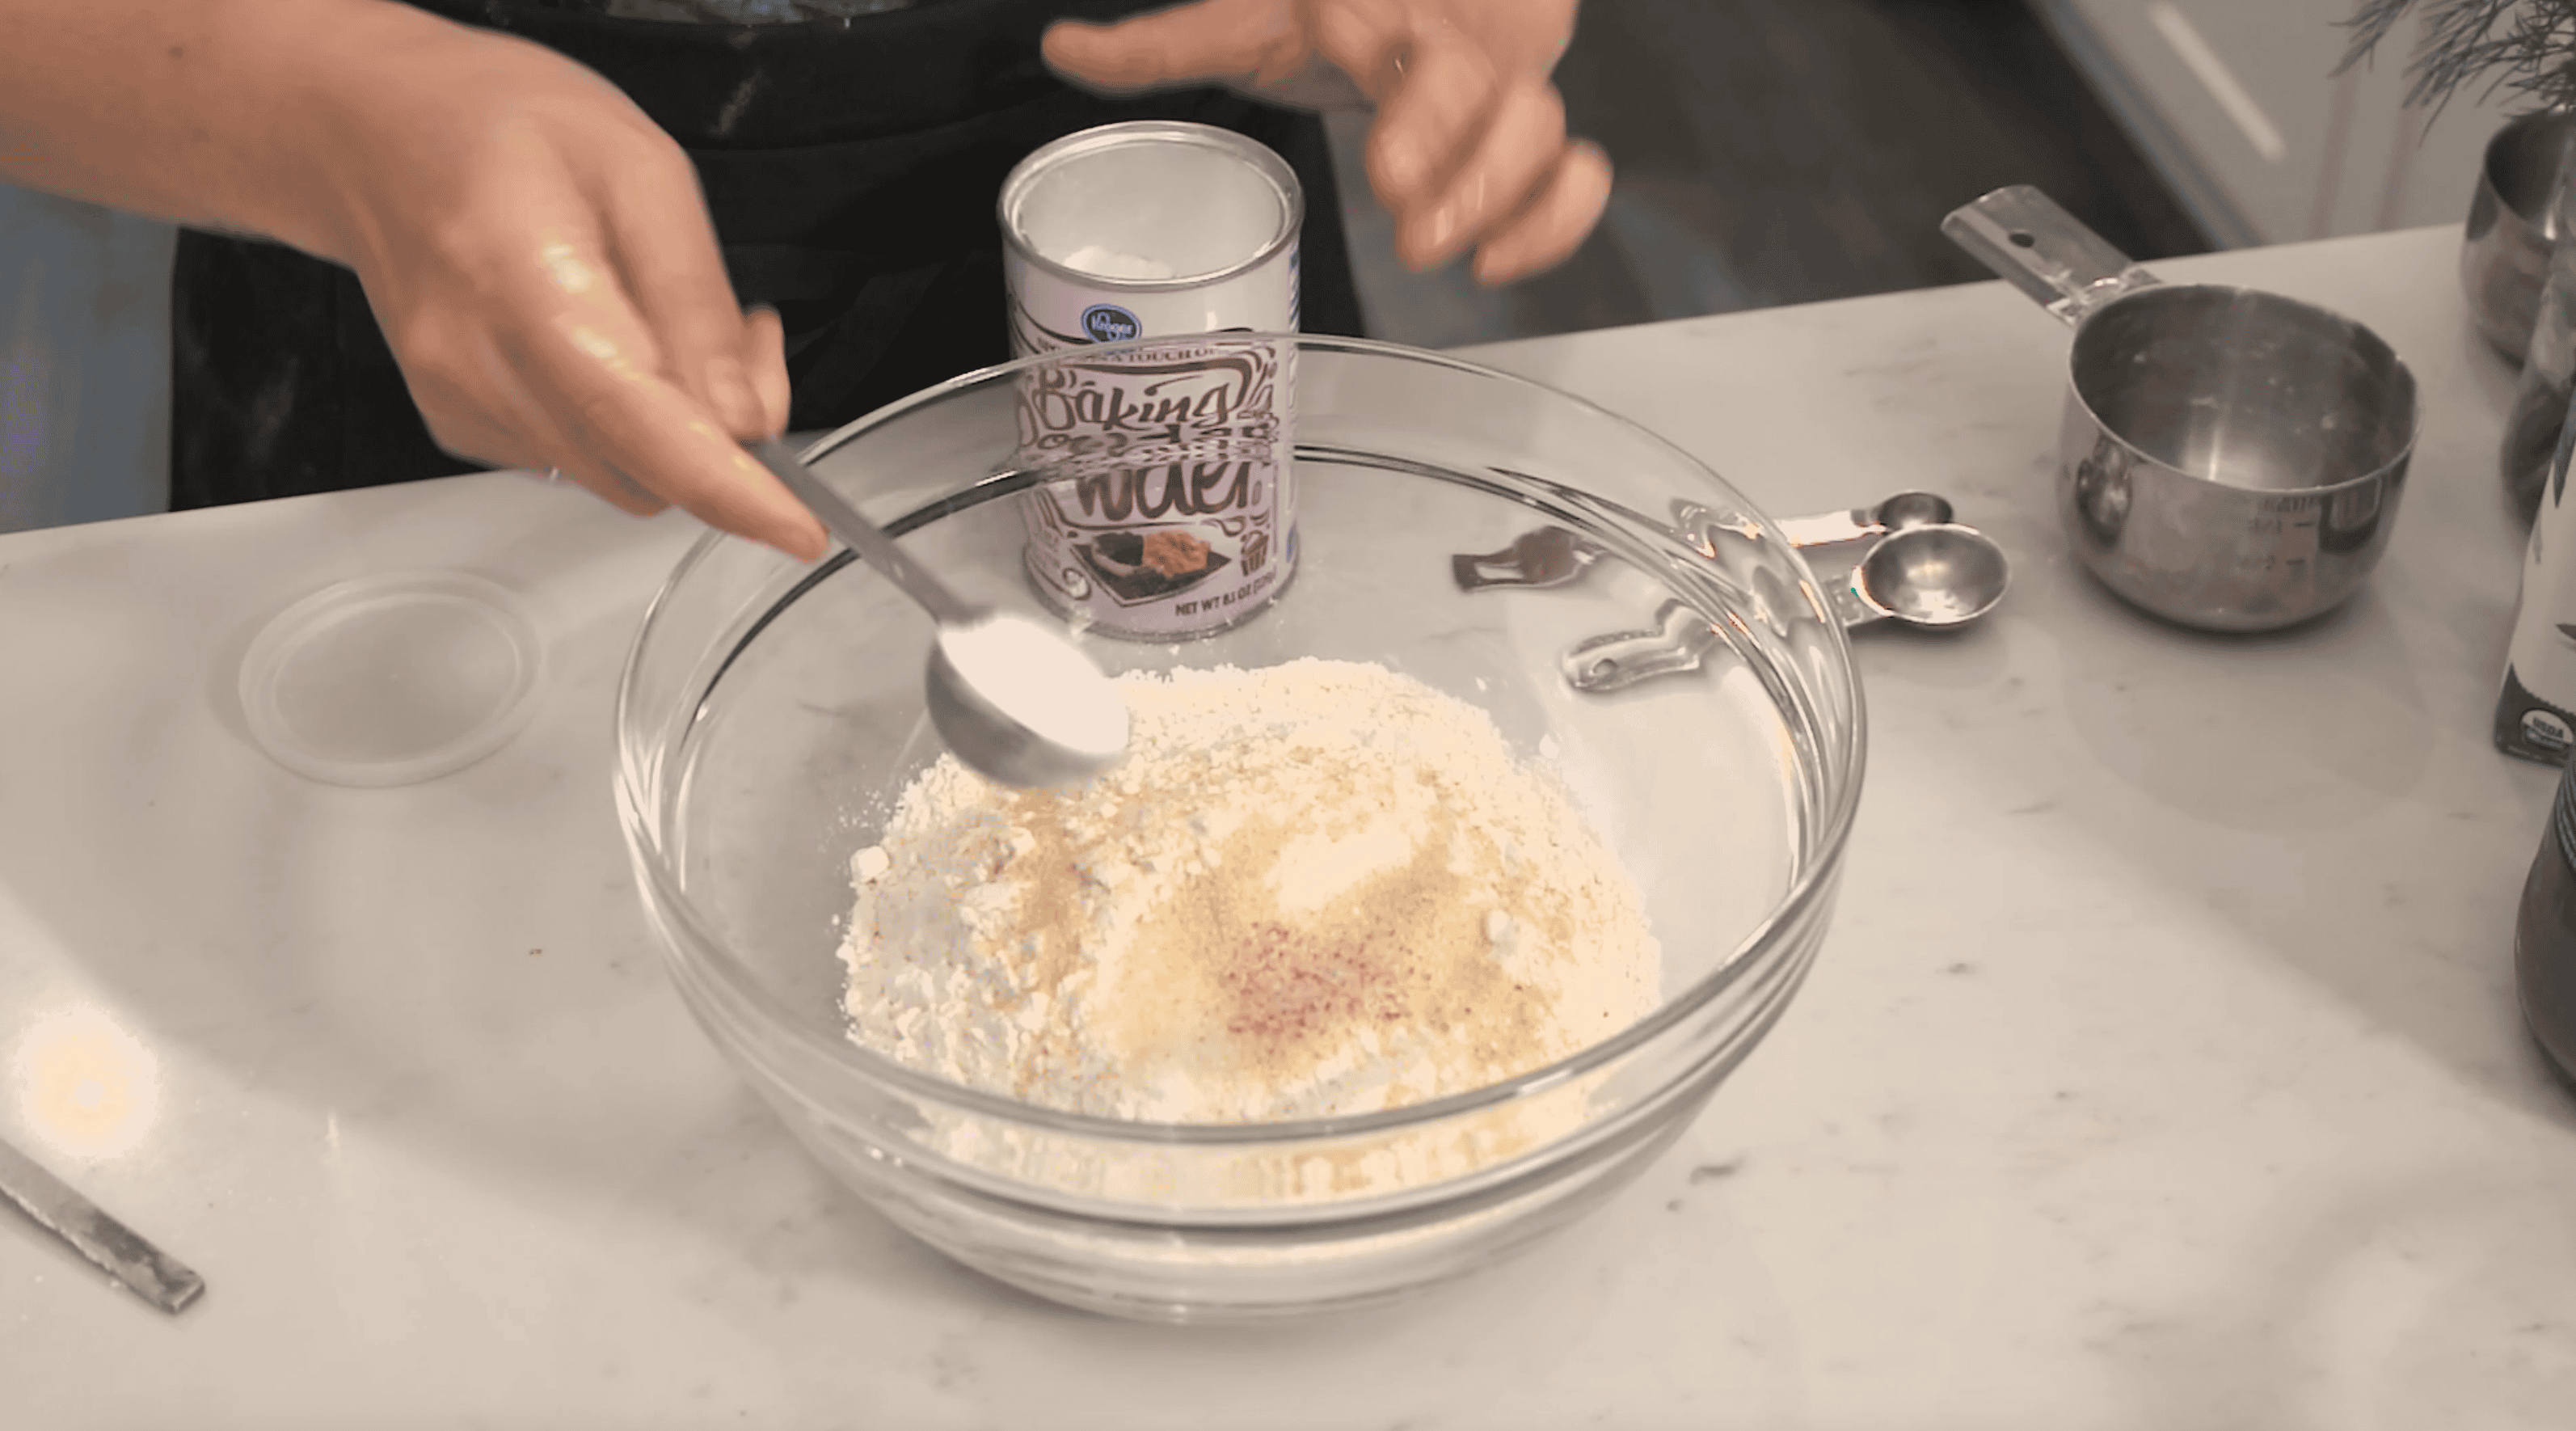 baking soda being added to a bowl of flour and other dry ingredients